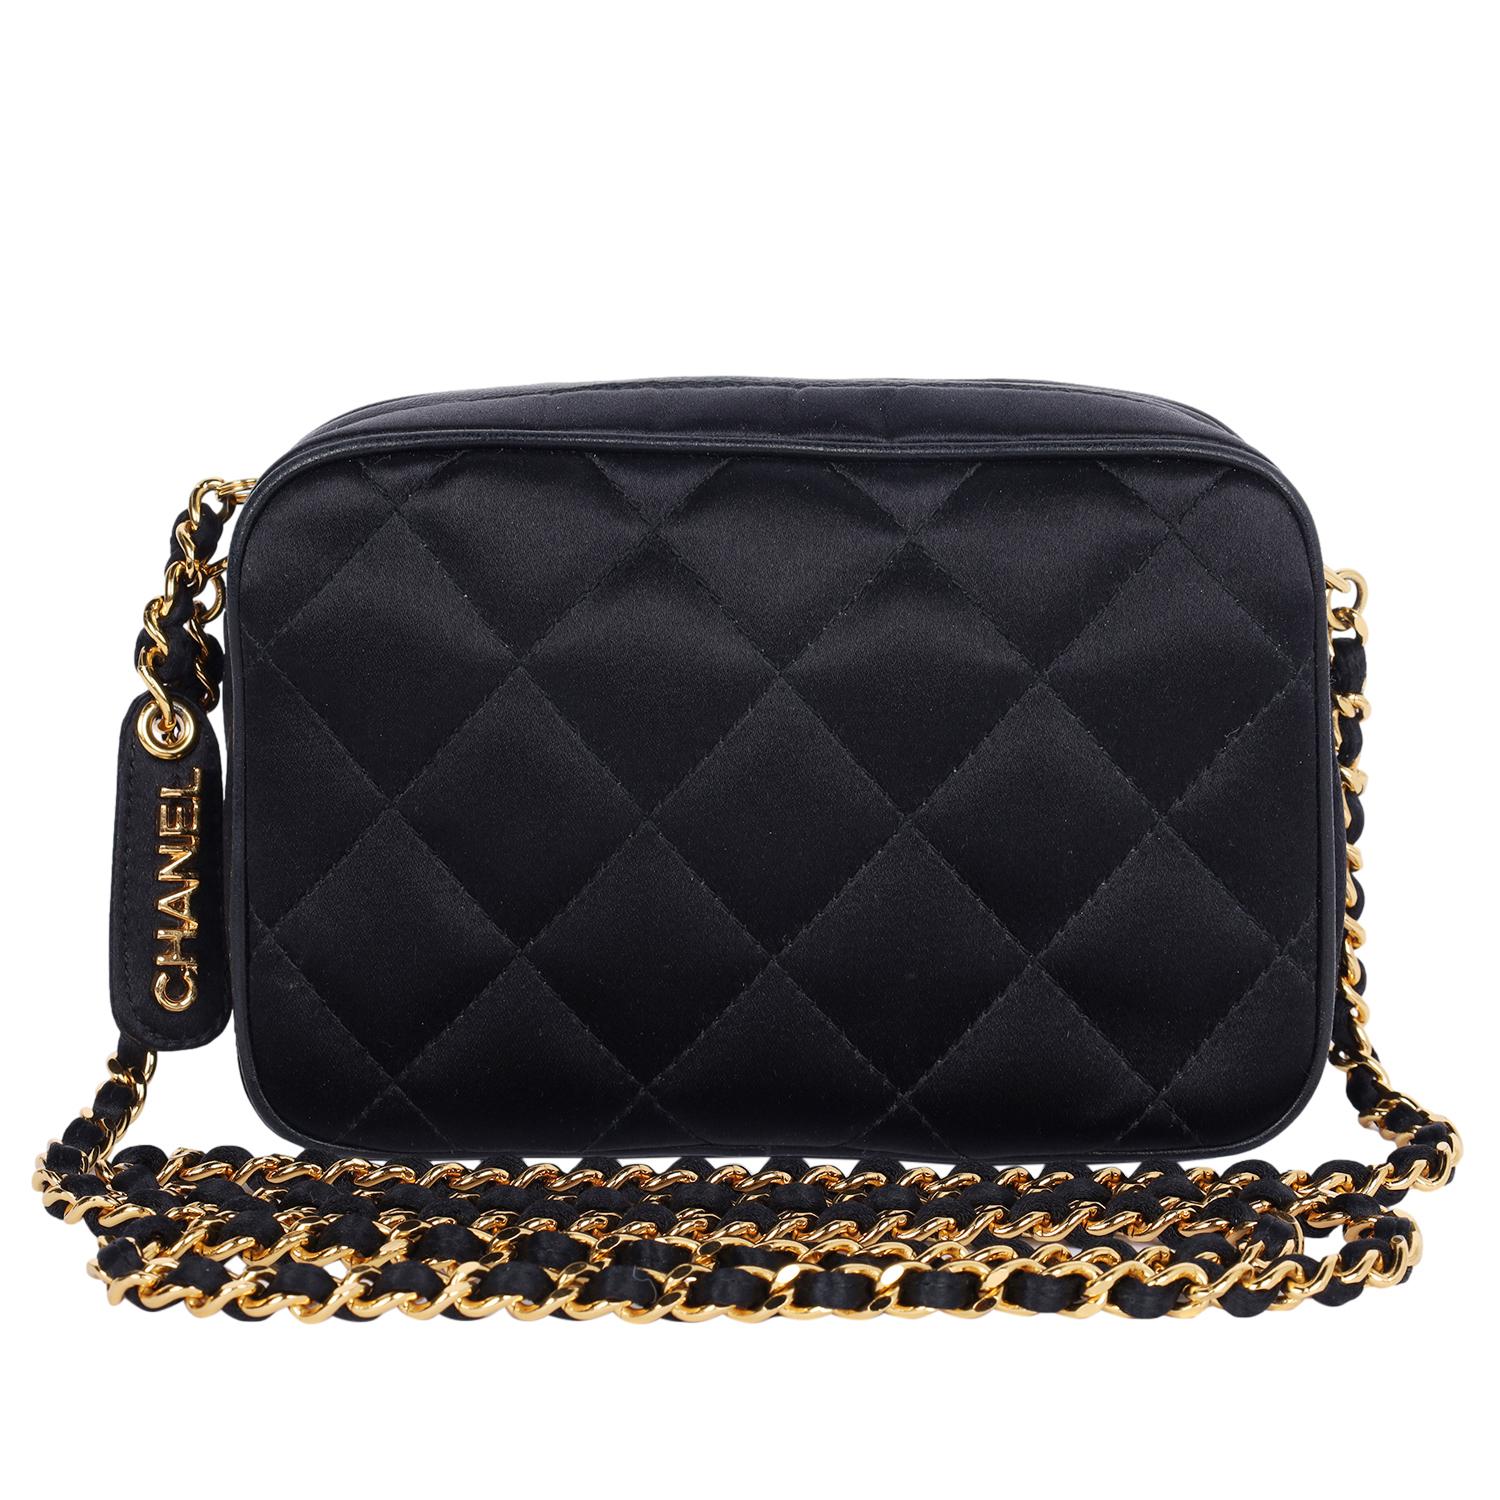 Chanel Mini Satin Leather Quilted Camera Cross Body Bag 1996 In Excellent Condition For Sale In Salt Lake Cty, UT